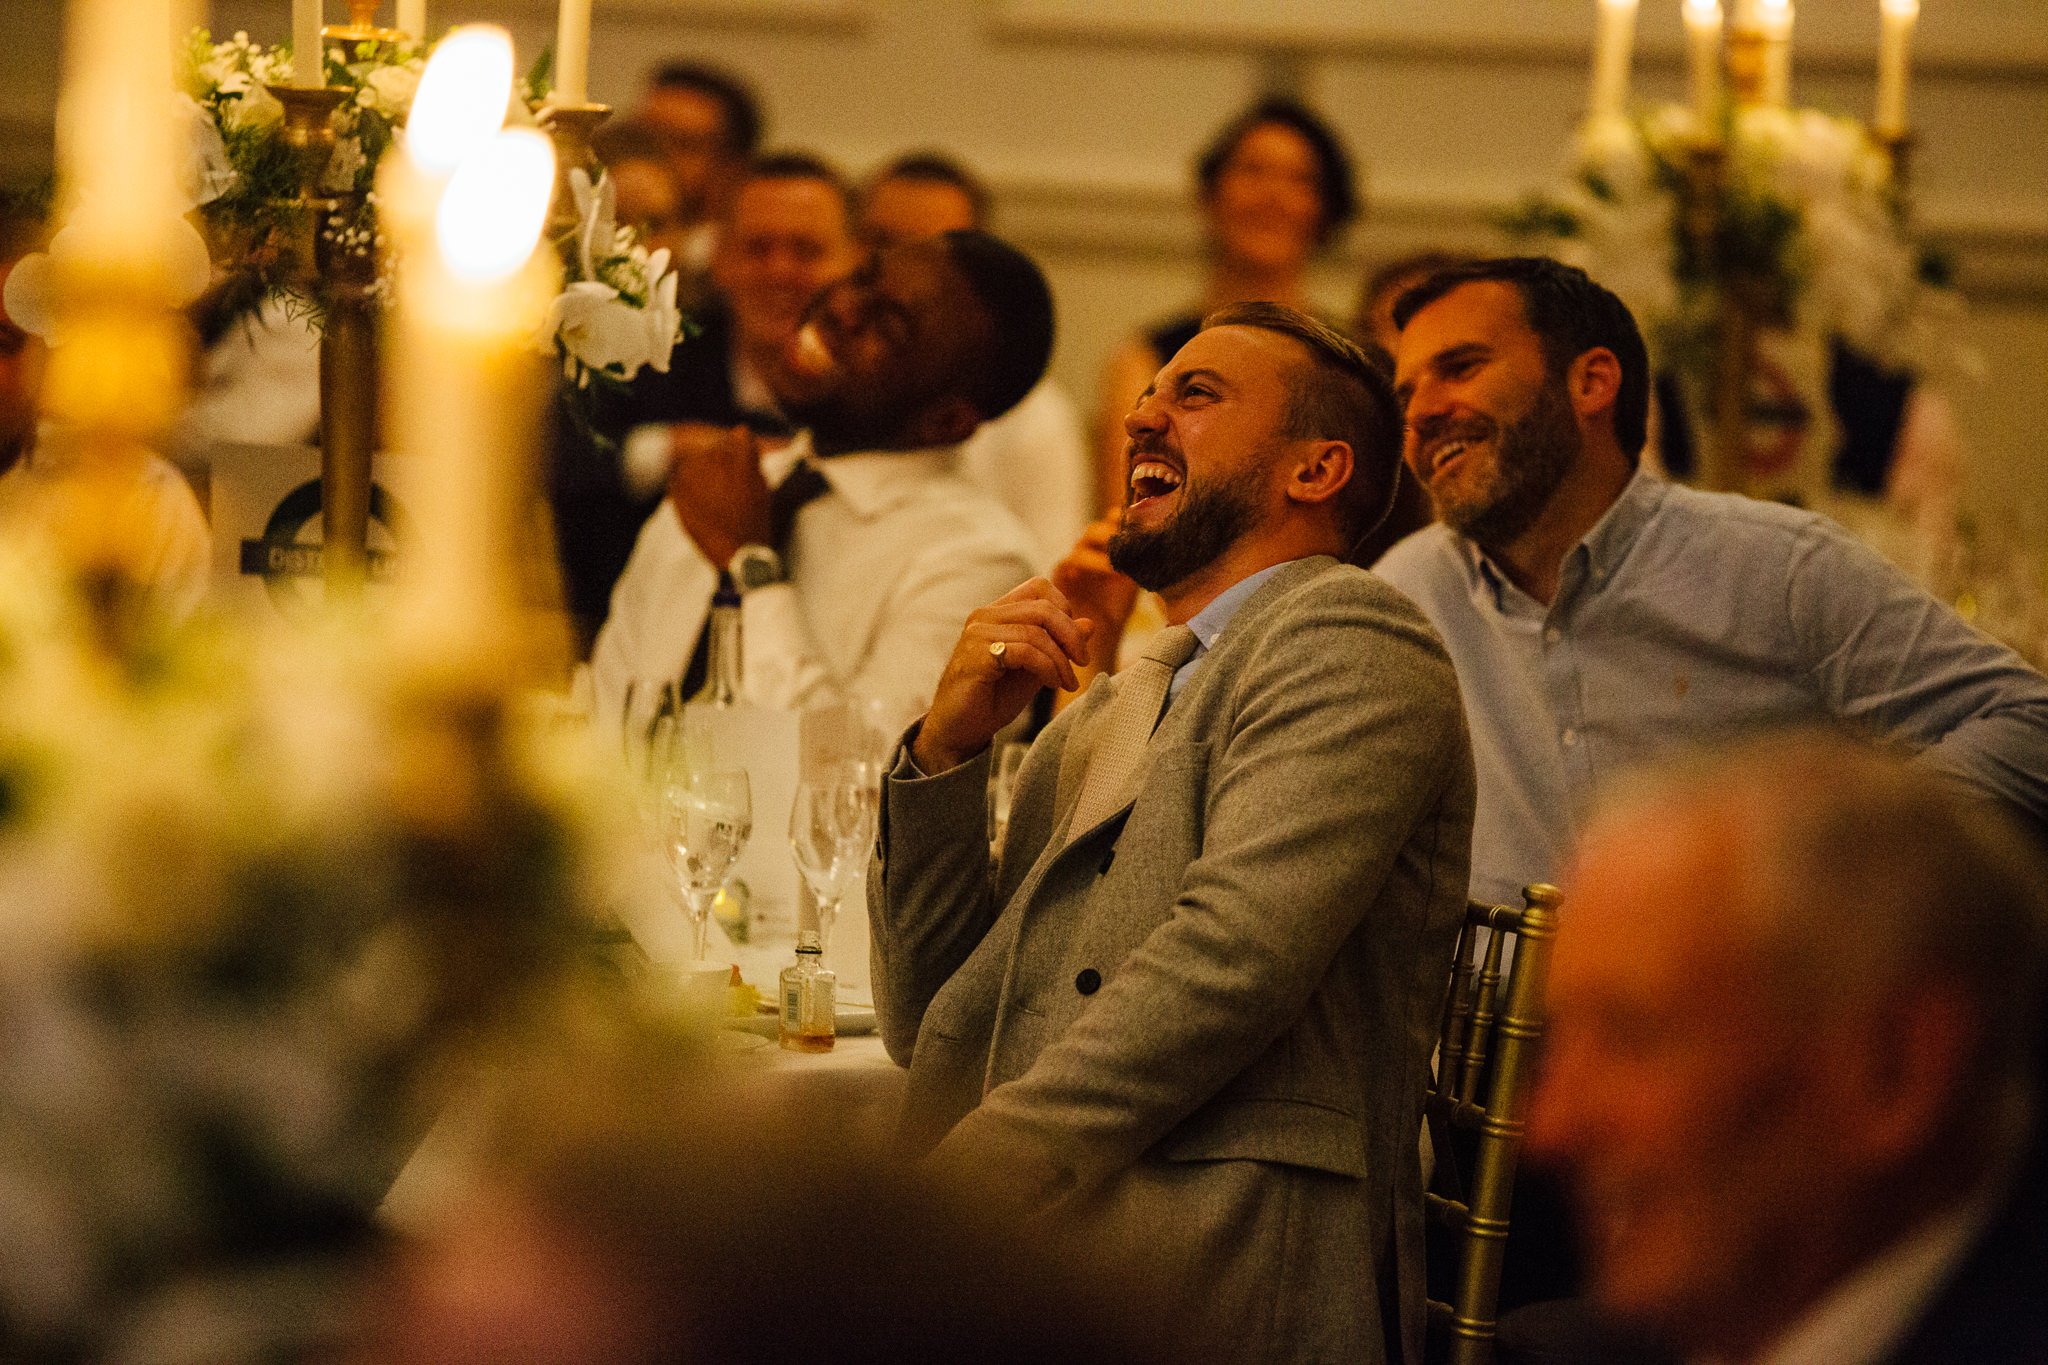  Male guest laughing during the speeches 